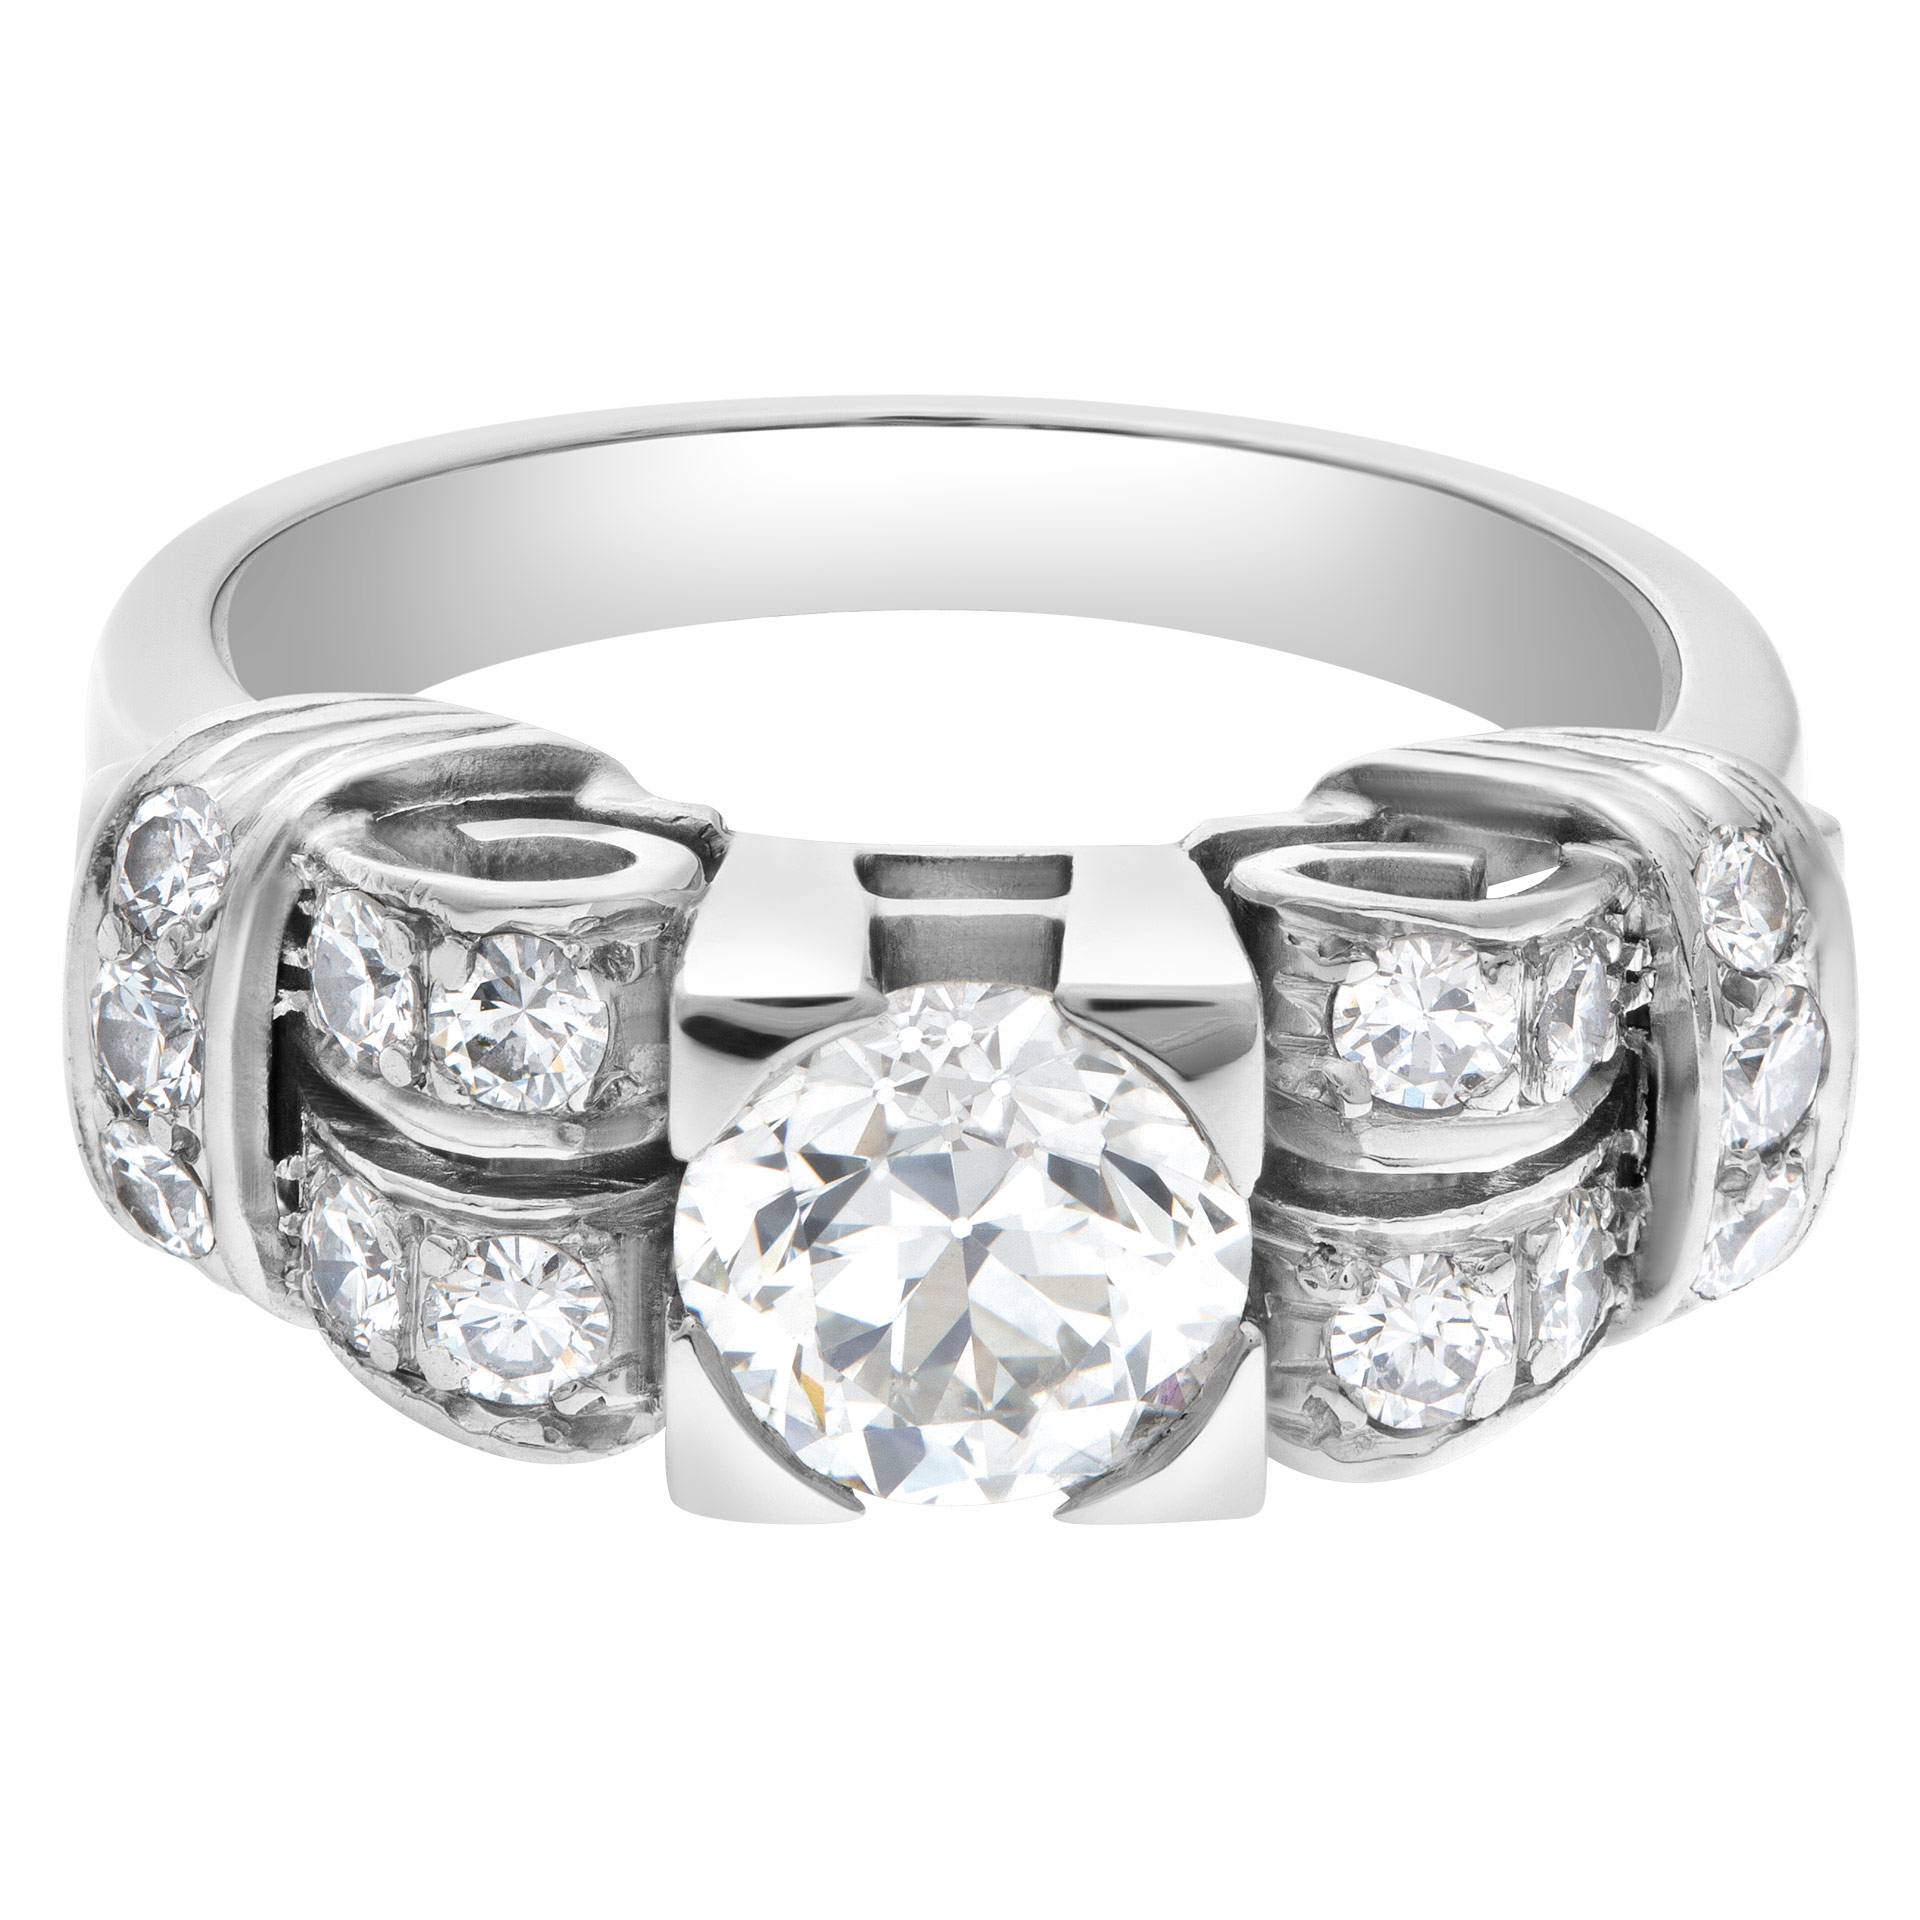 GIA certified round briiliant diamond 1.13 carats (J color, VS2 clarity) ring set in platinum. Size 7